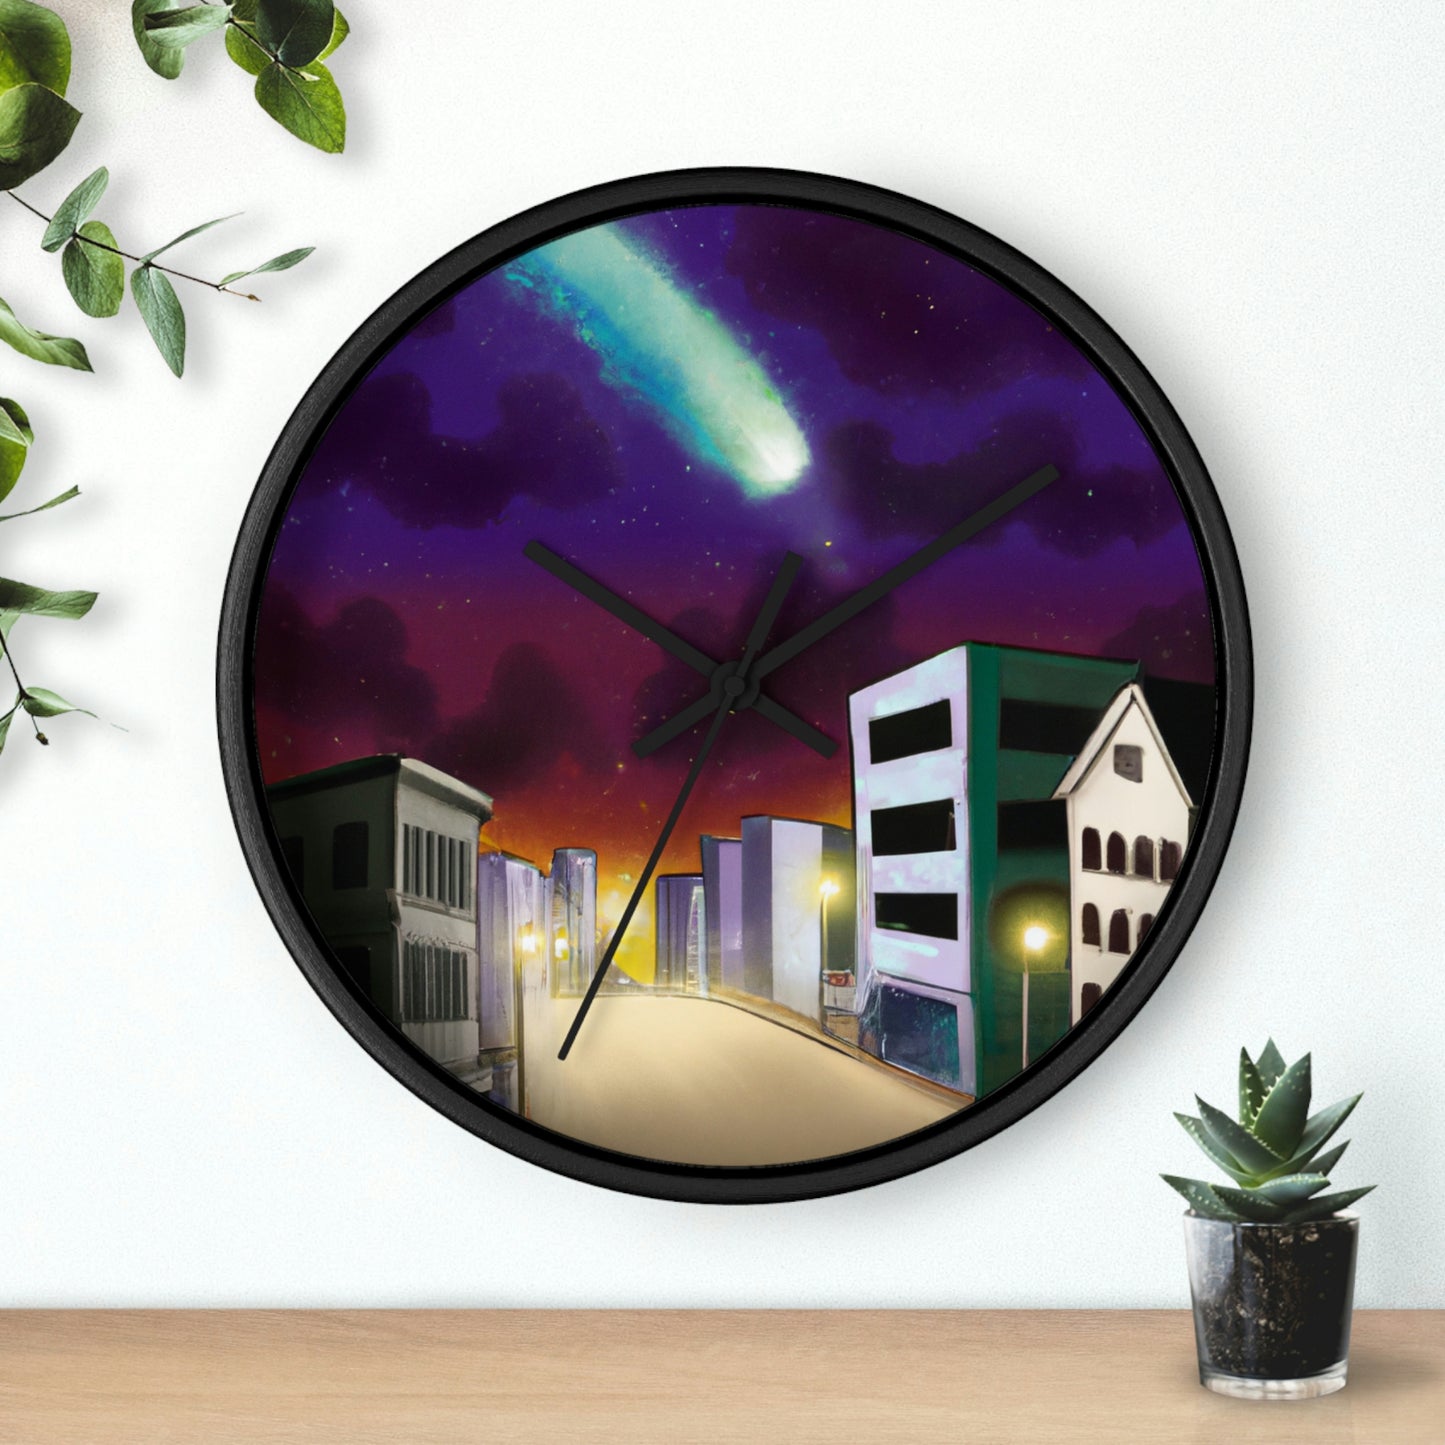 "The Comet's Transformation" - The Alien Wall Clock